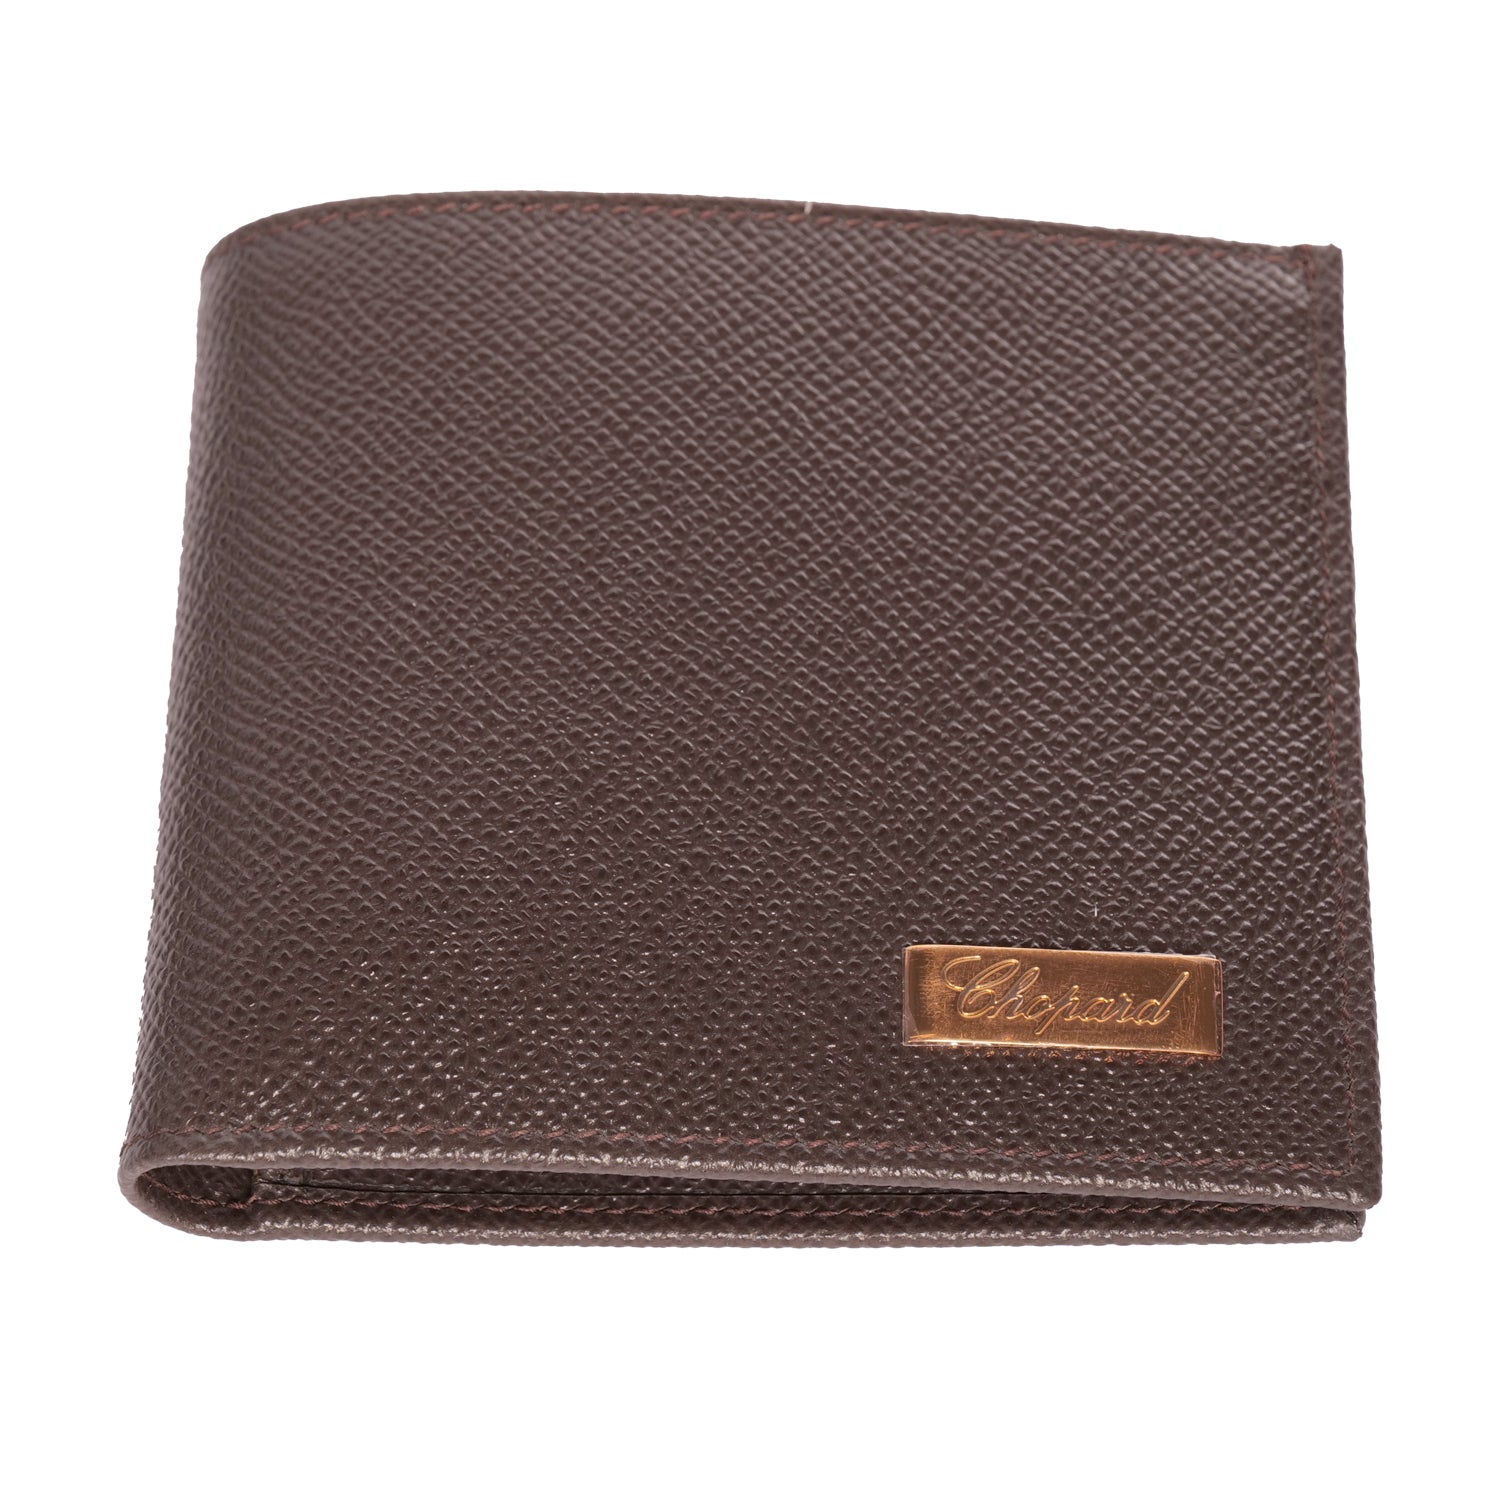 CHOPARD CLASSICO SMALL WALLET IN BROWN